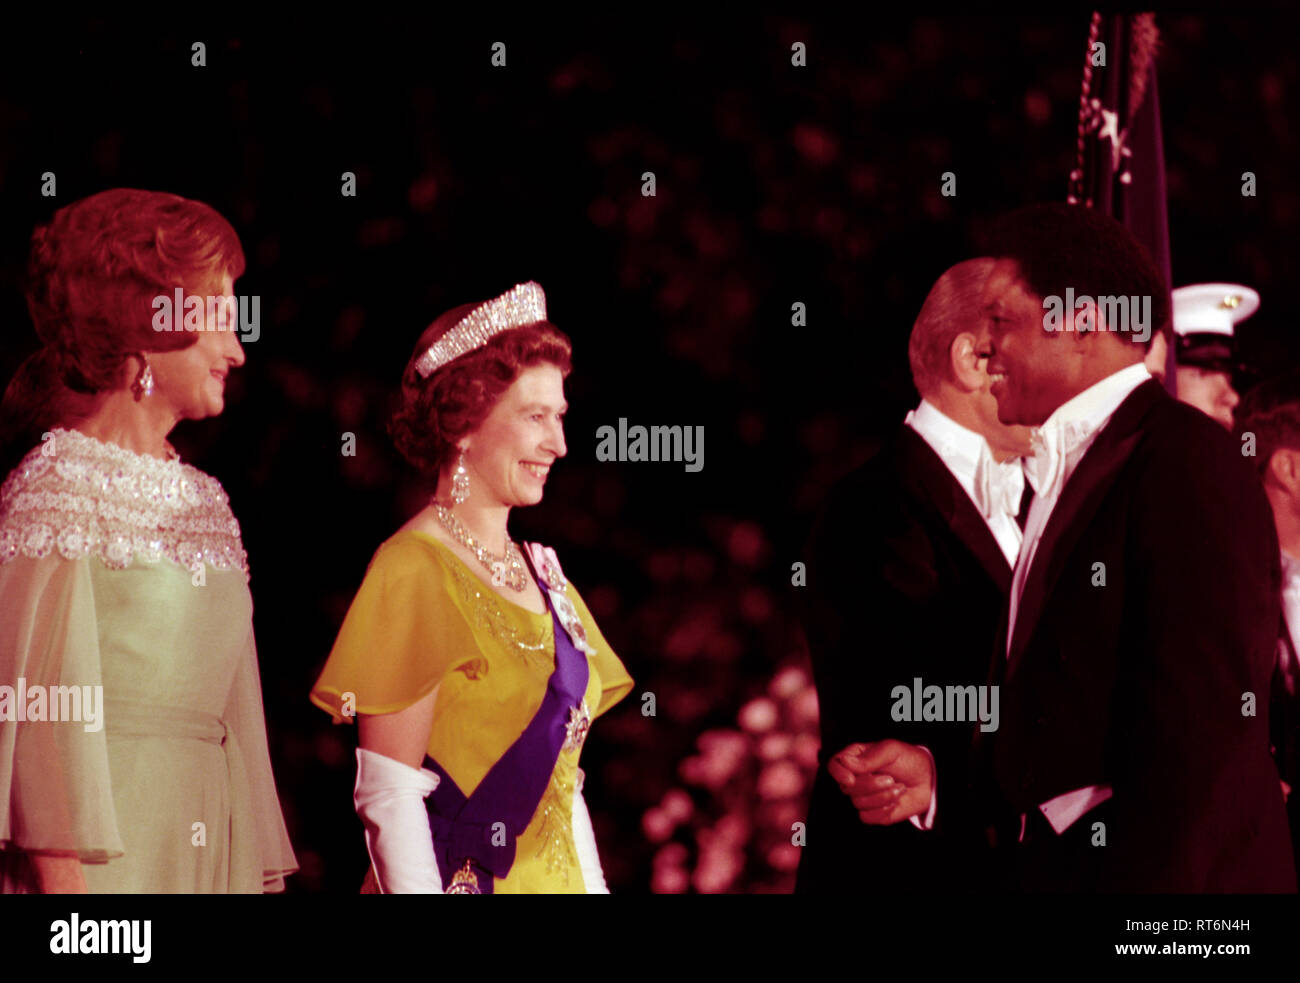 july-7-1976-the-white-house-south-lawn-betty-ford-queen-elizabeth-ii-willie-mays-greeting-handshaking-standing-talking-smiling-white-tie-formal-wear-receiving-line-prior-to-state-dinner-in-honor-of-queen-elizabeth-ii-and-prince-philip-former-major-league-baseball-player-RT6N4H.jpg